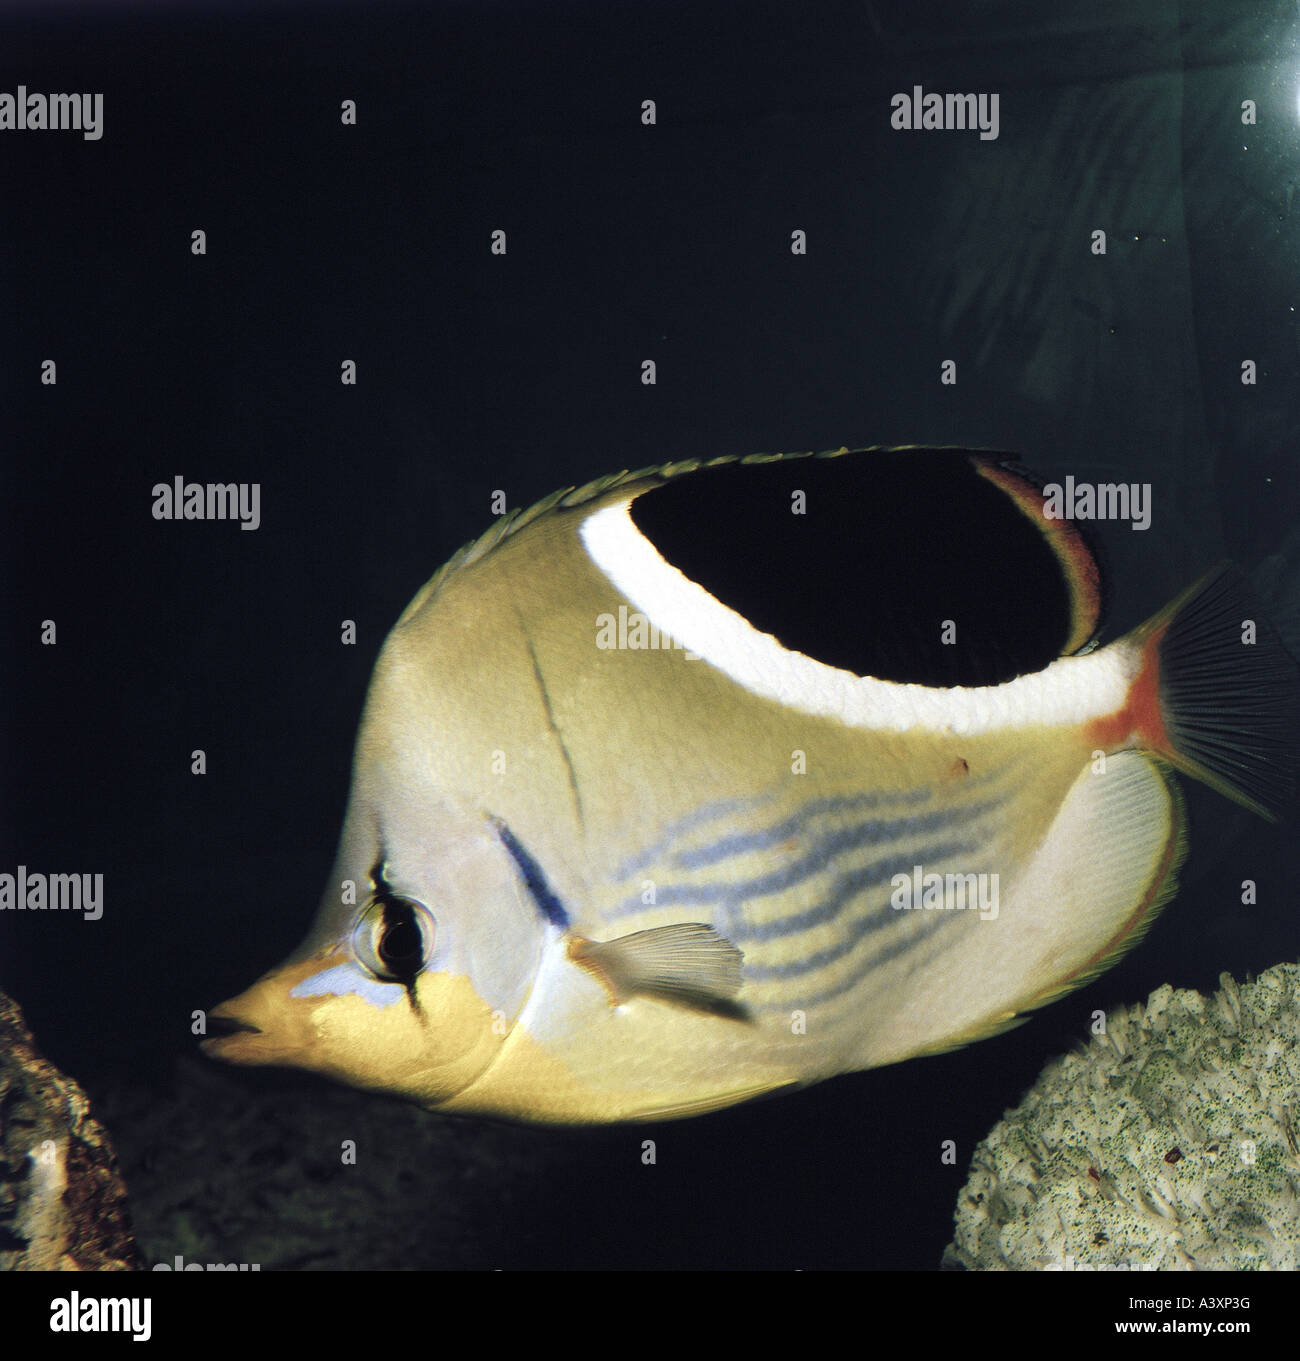 zoology / animals, fish, Saddled Butterflyfish, (Chaetodon ephippium), in Great Barrier Reef, animal, Stock Photo